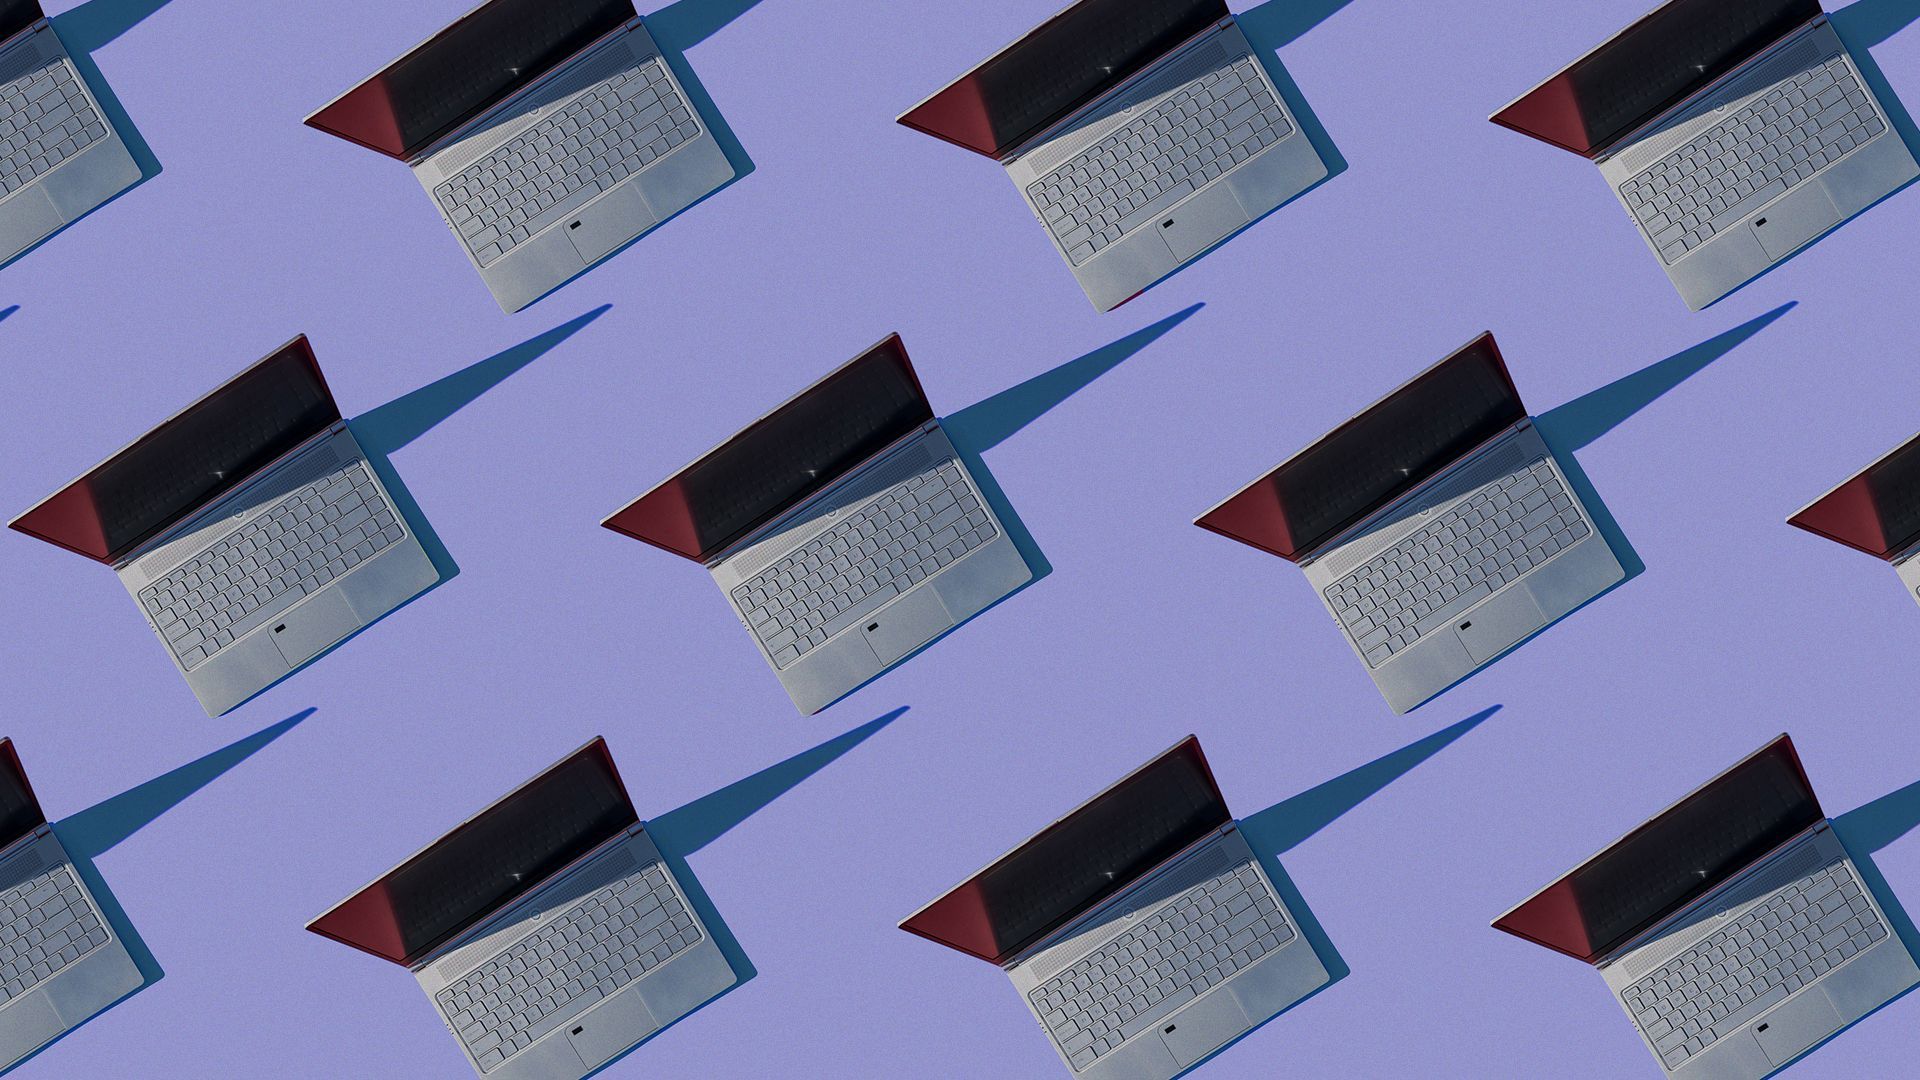 Illustration of top down view of opened laptops in a grid pattern.